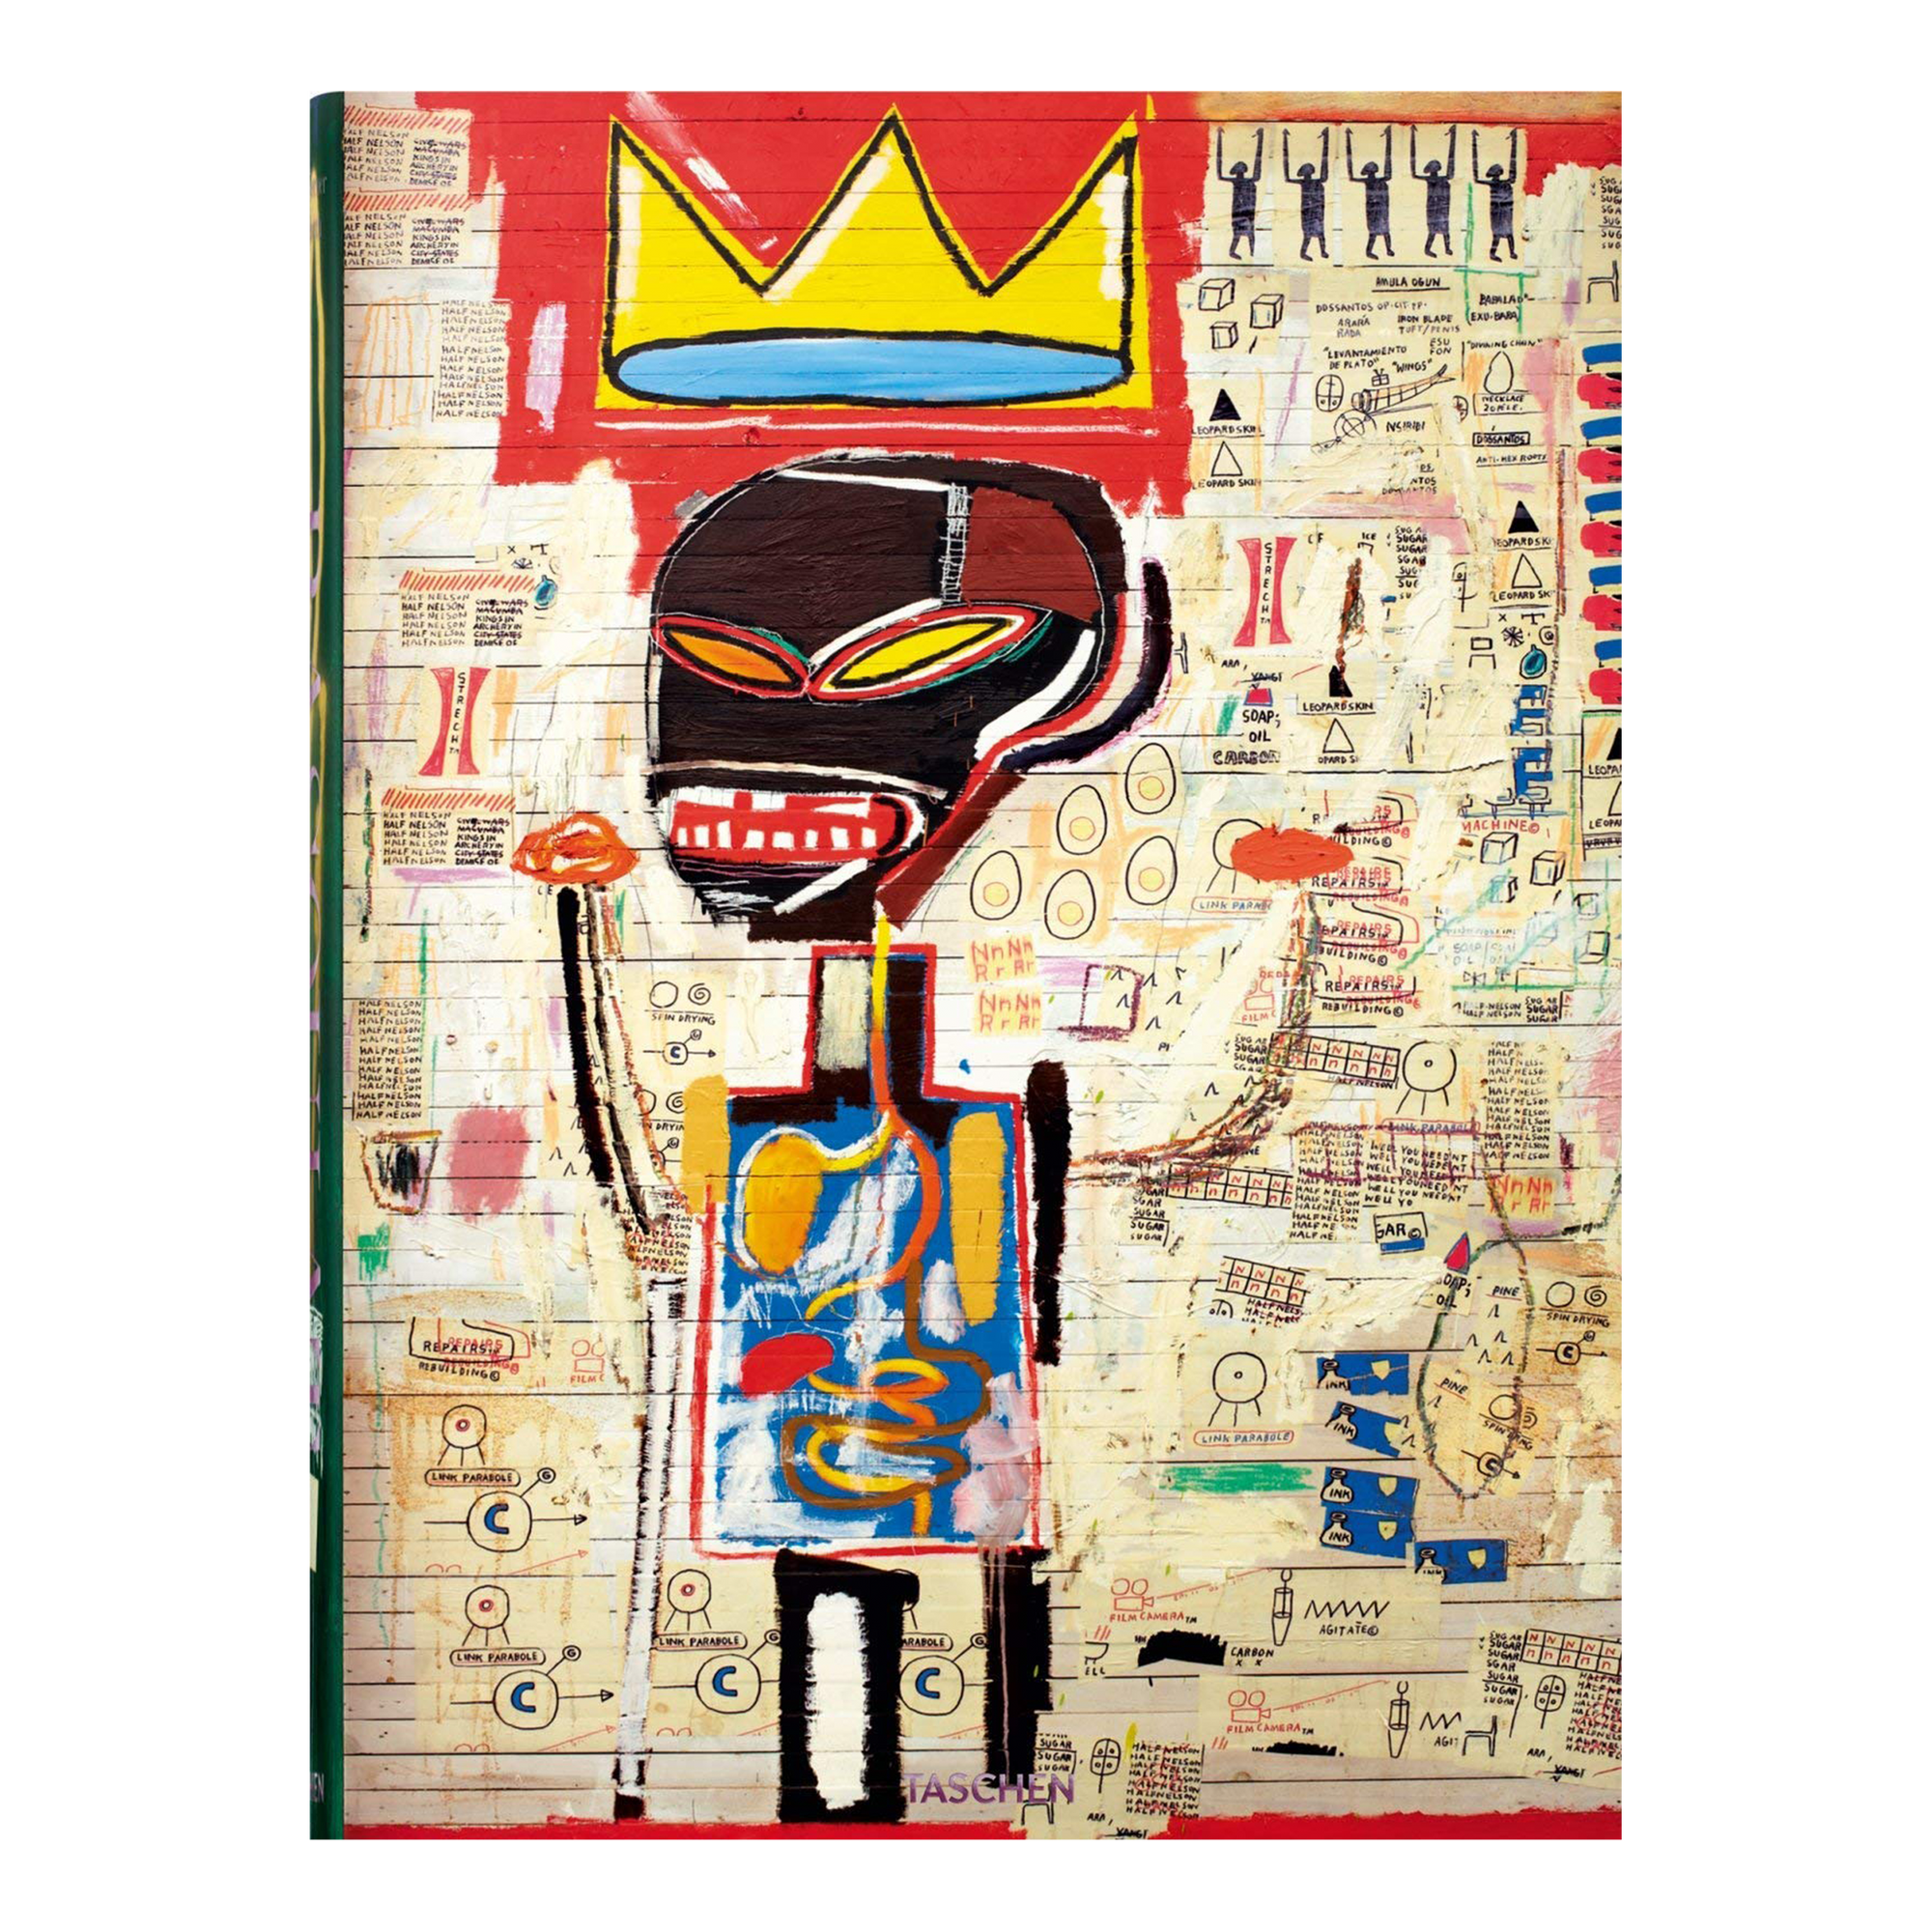 Basquiat's expressive style was based on raw figures and integrated words and phrases.